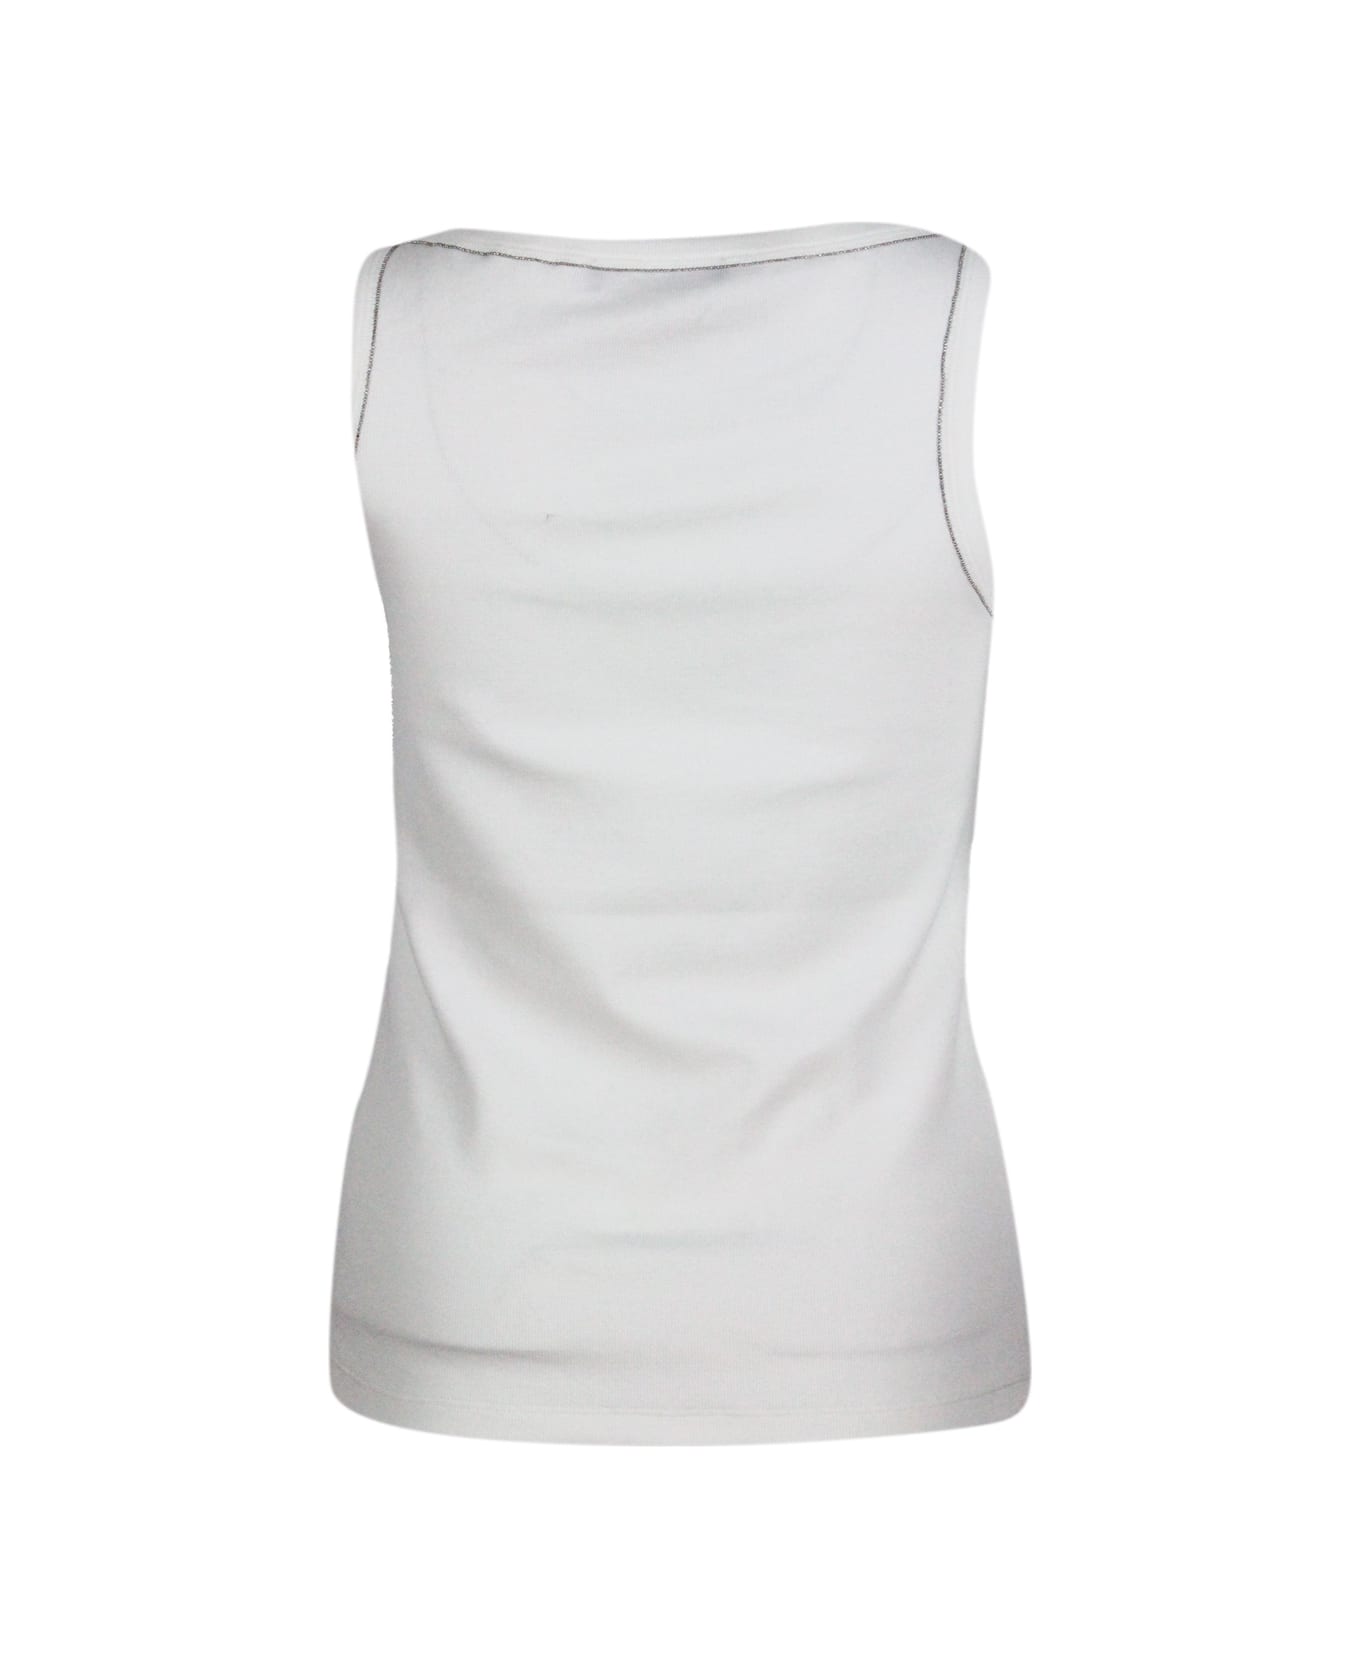 Fabiana Filippi Sleeveless T-shirt, Ribbed Cotton Tank Top With U-neck, Elbow-length Sleeves Embellished With Rows Of Monili On The Neck And Sides - White